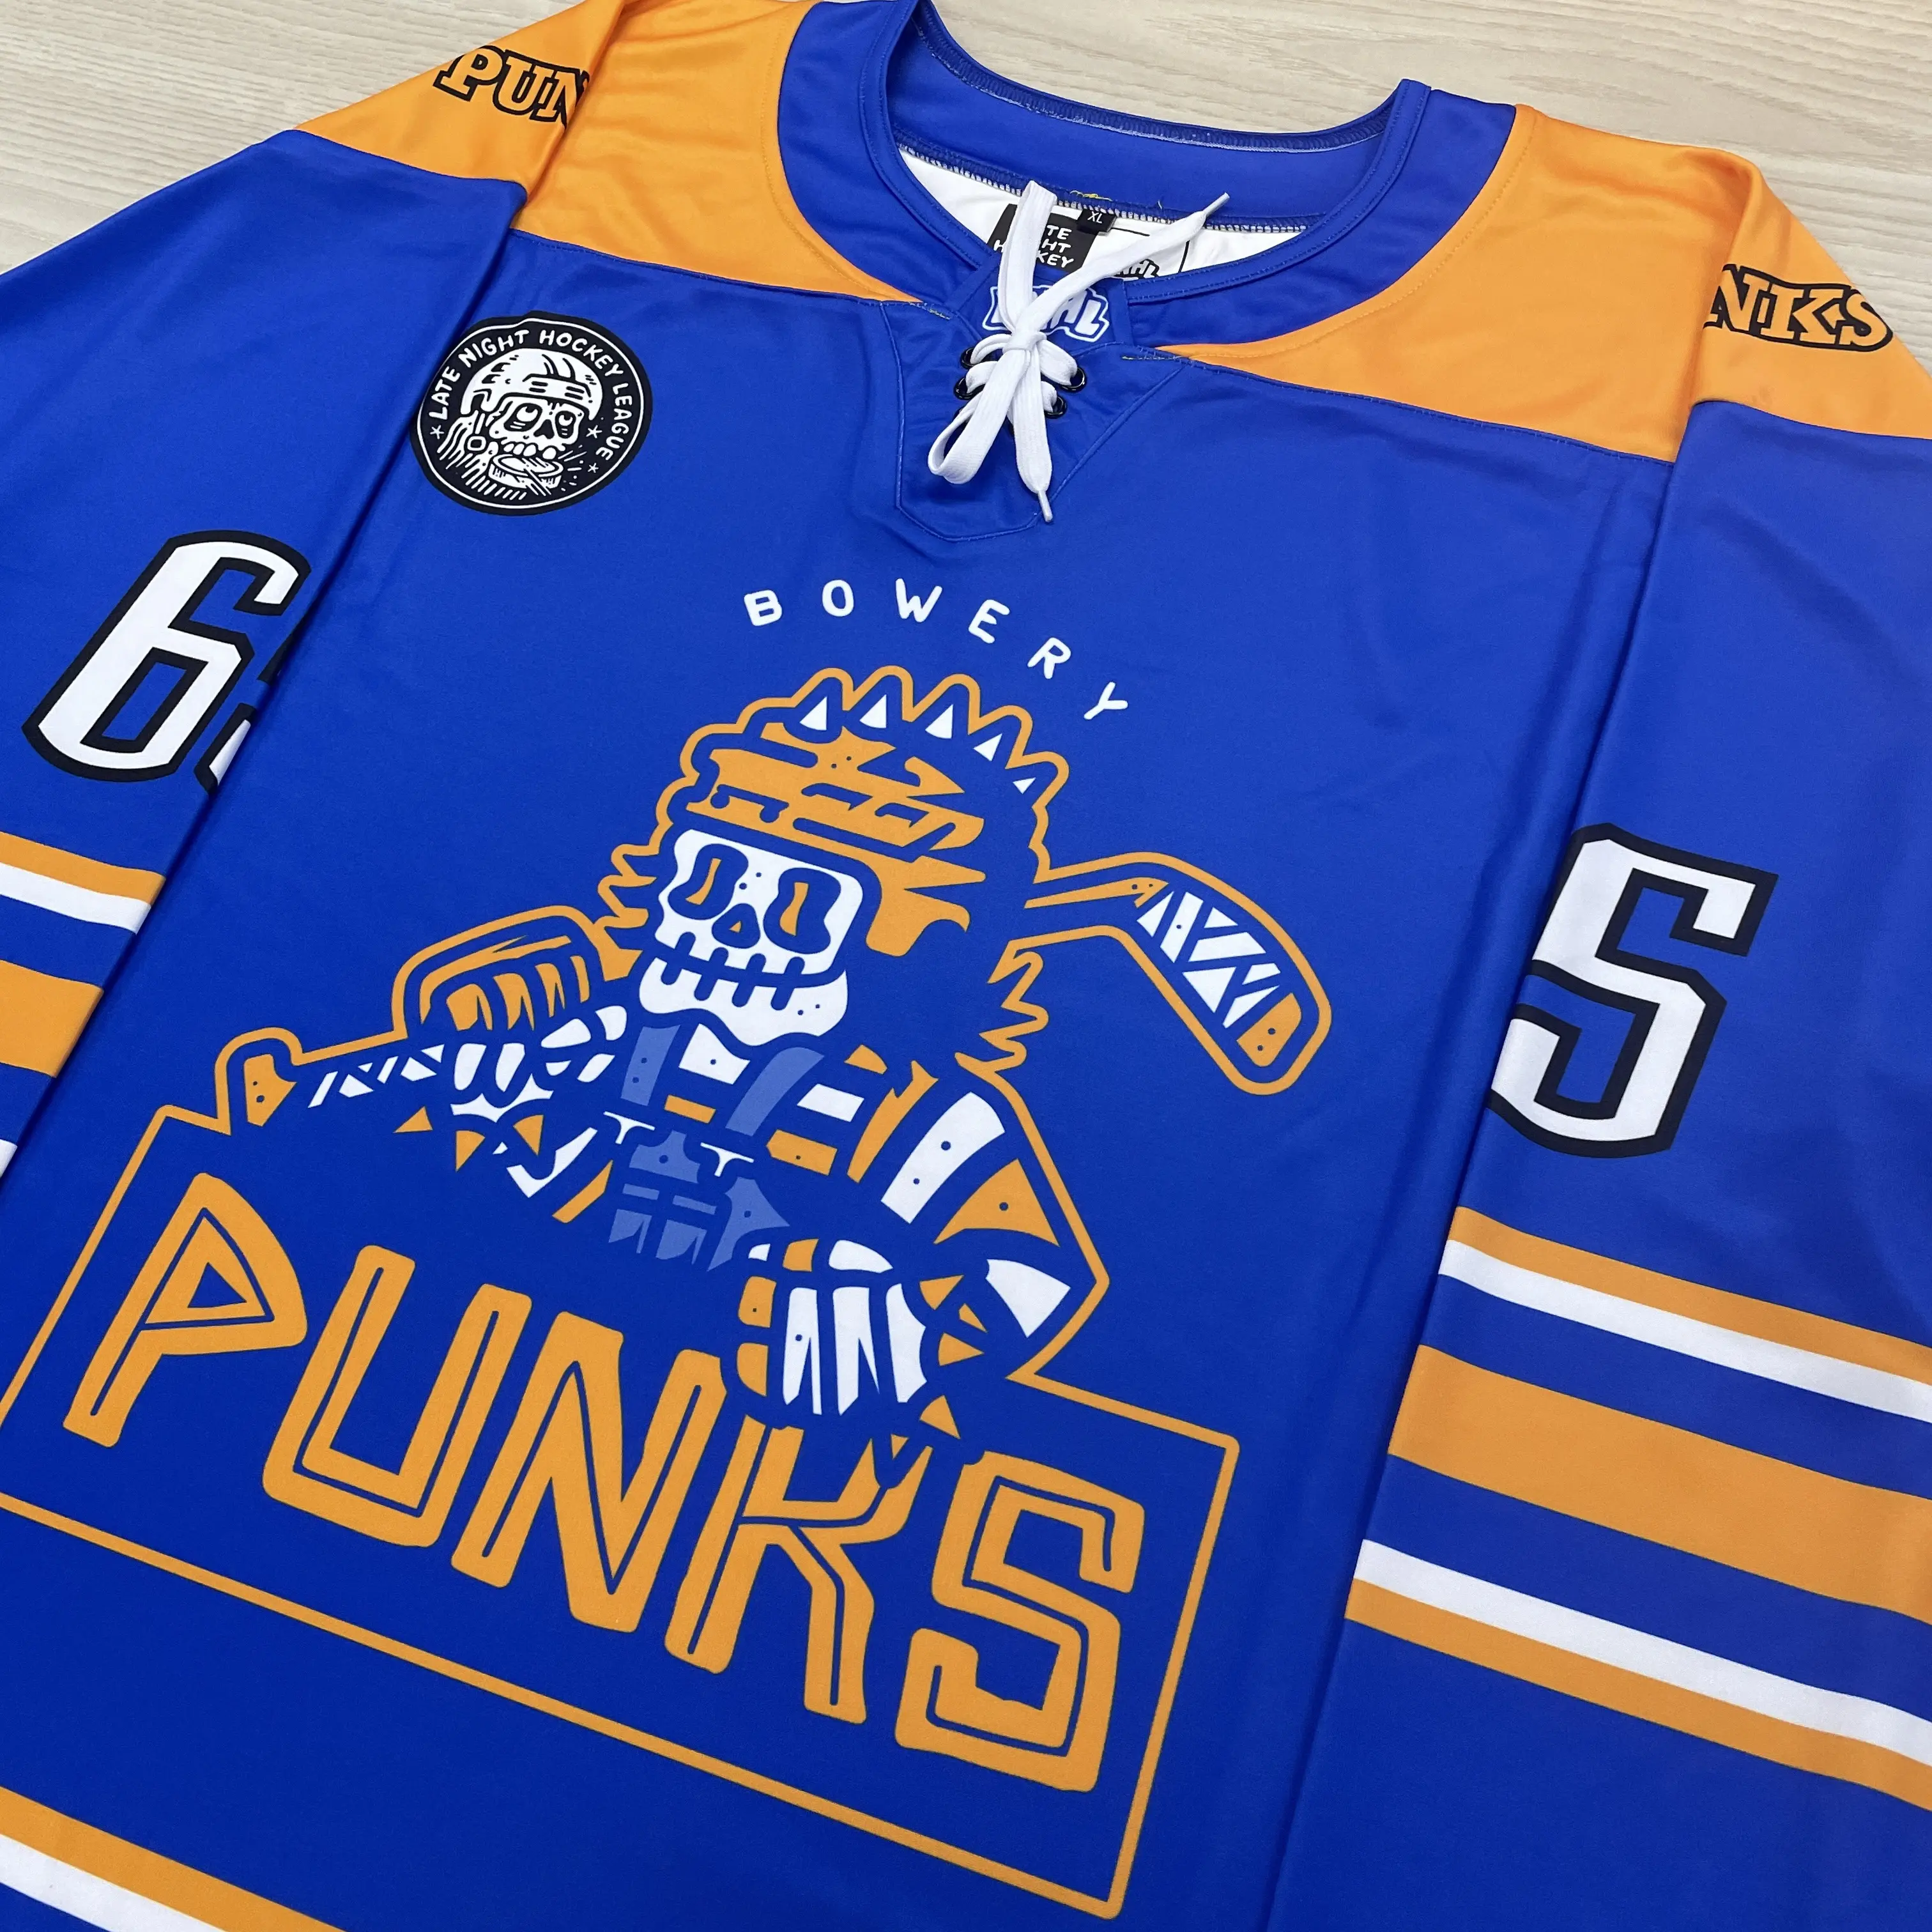 Full Sublimation Printing hockey jersey with custom design